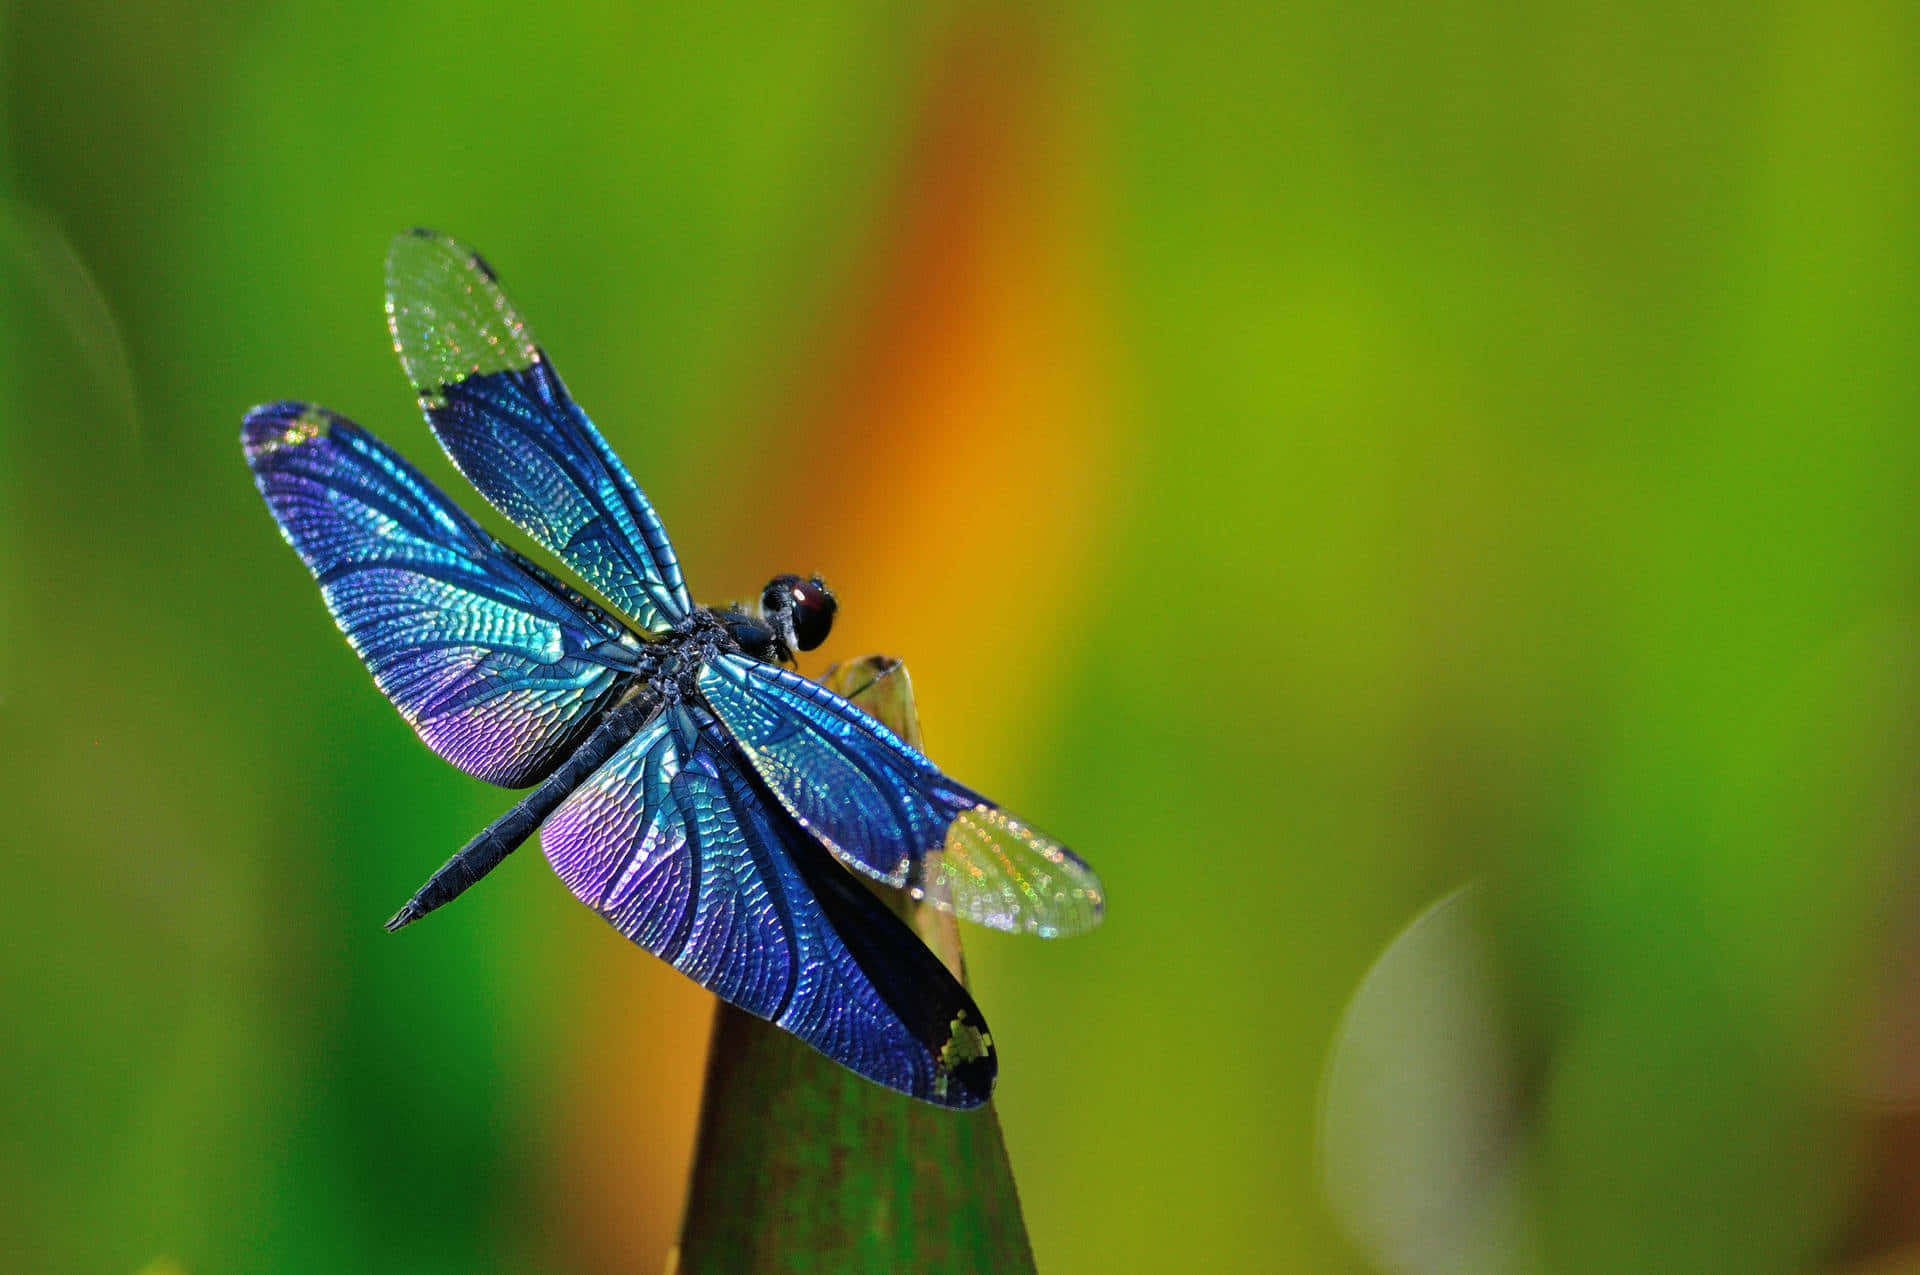 Blue Metalica Dragonfly Insects Wallpaper